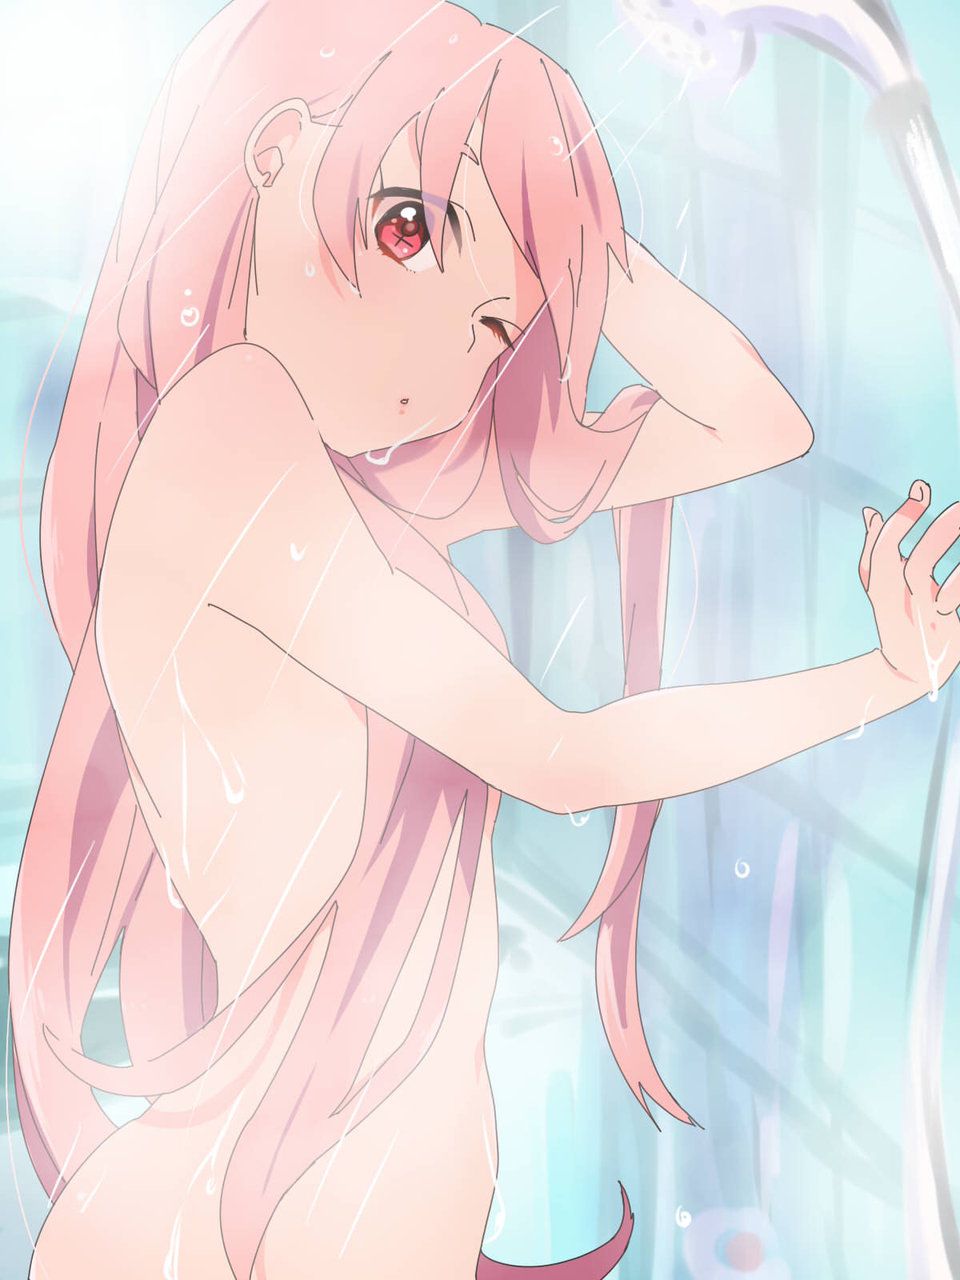 Secondary fetish image of bath and hot spring. 3